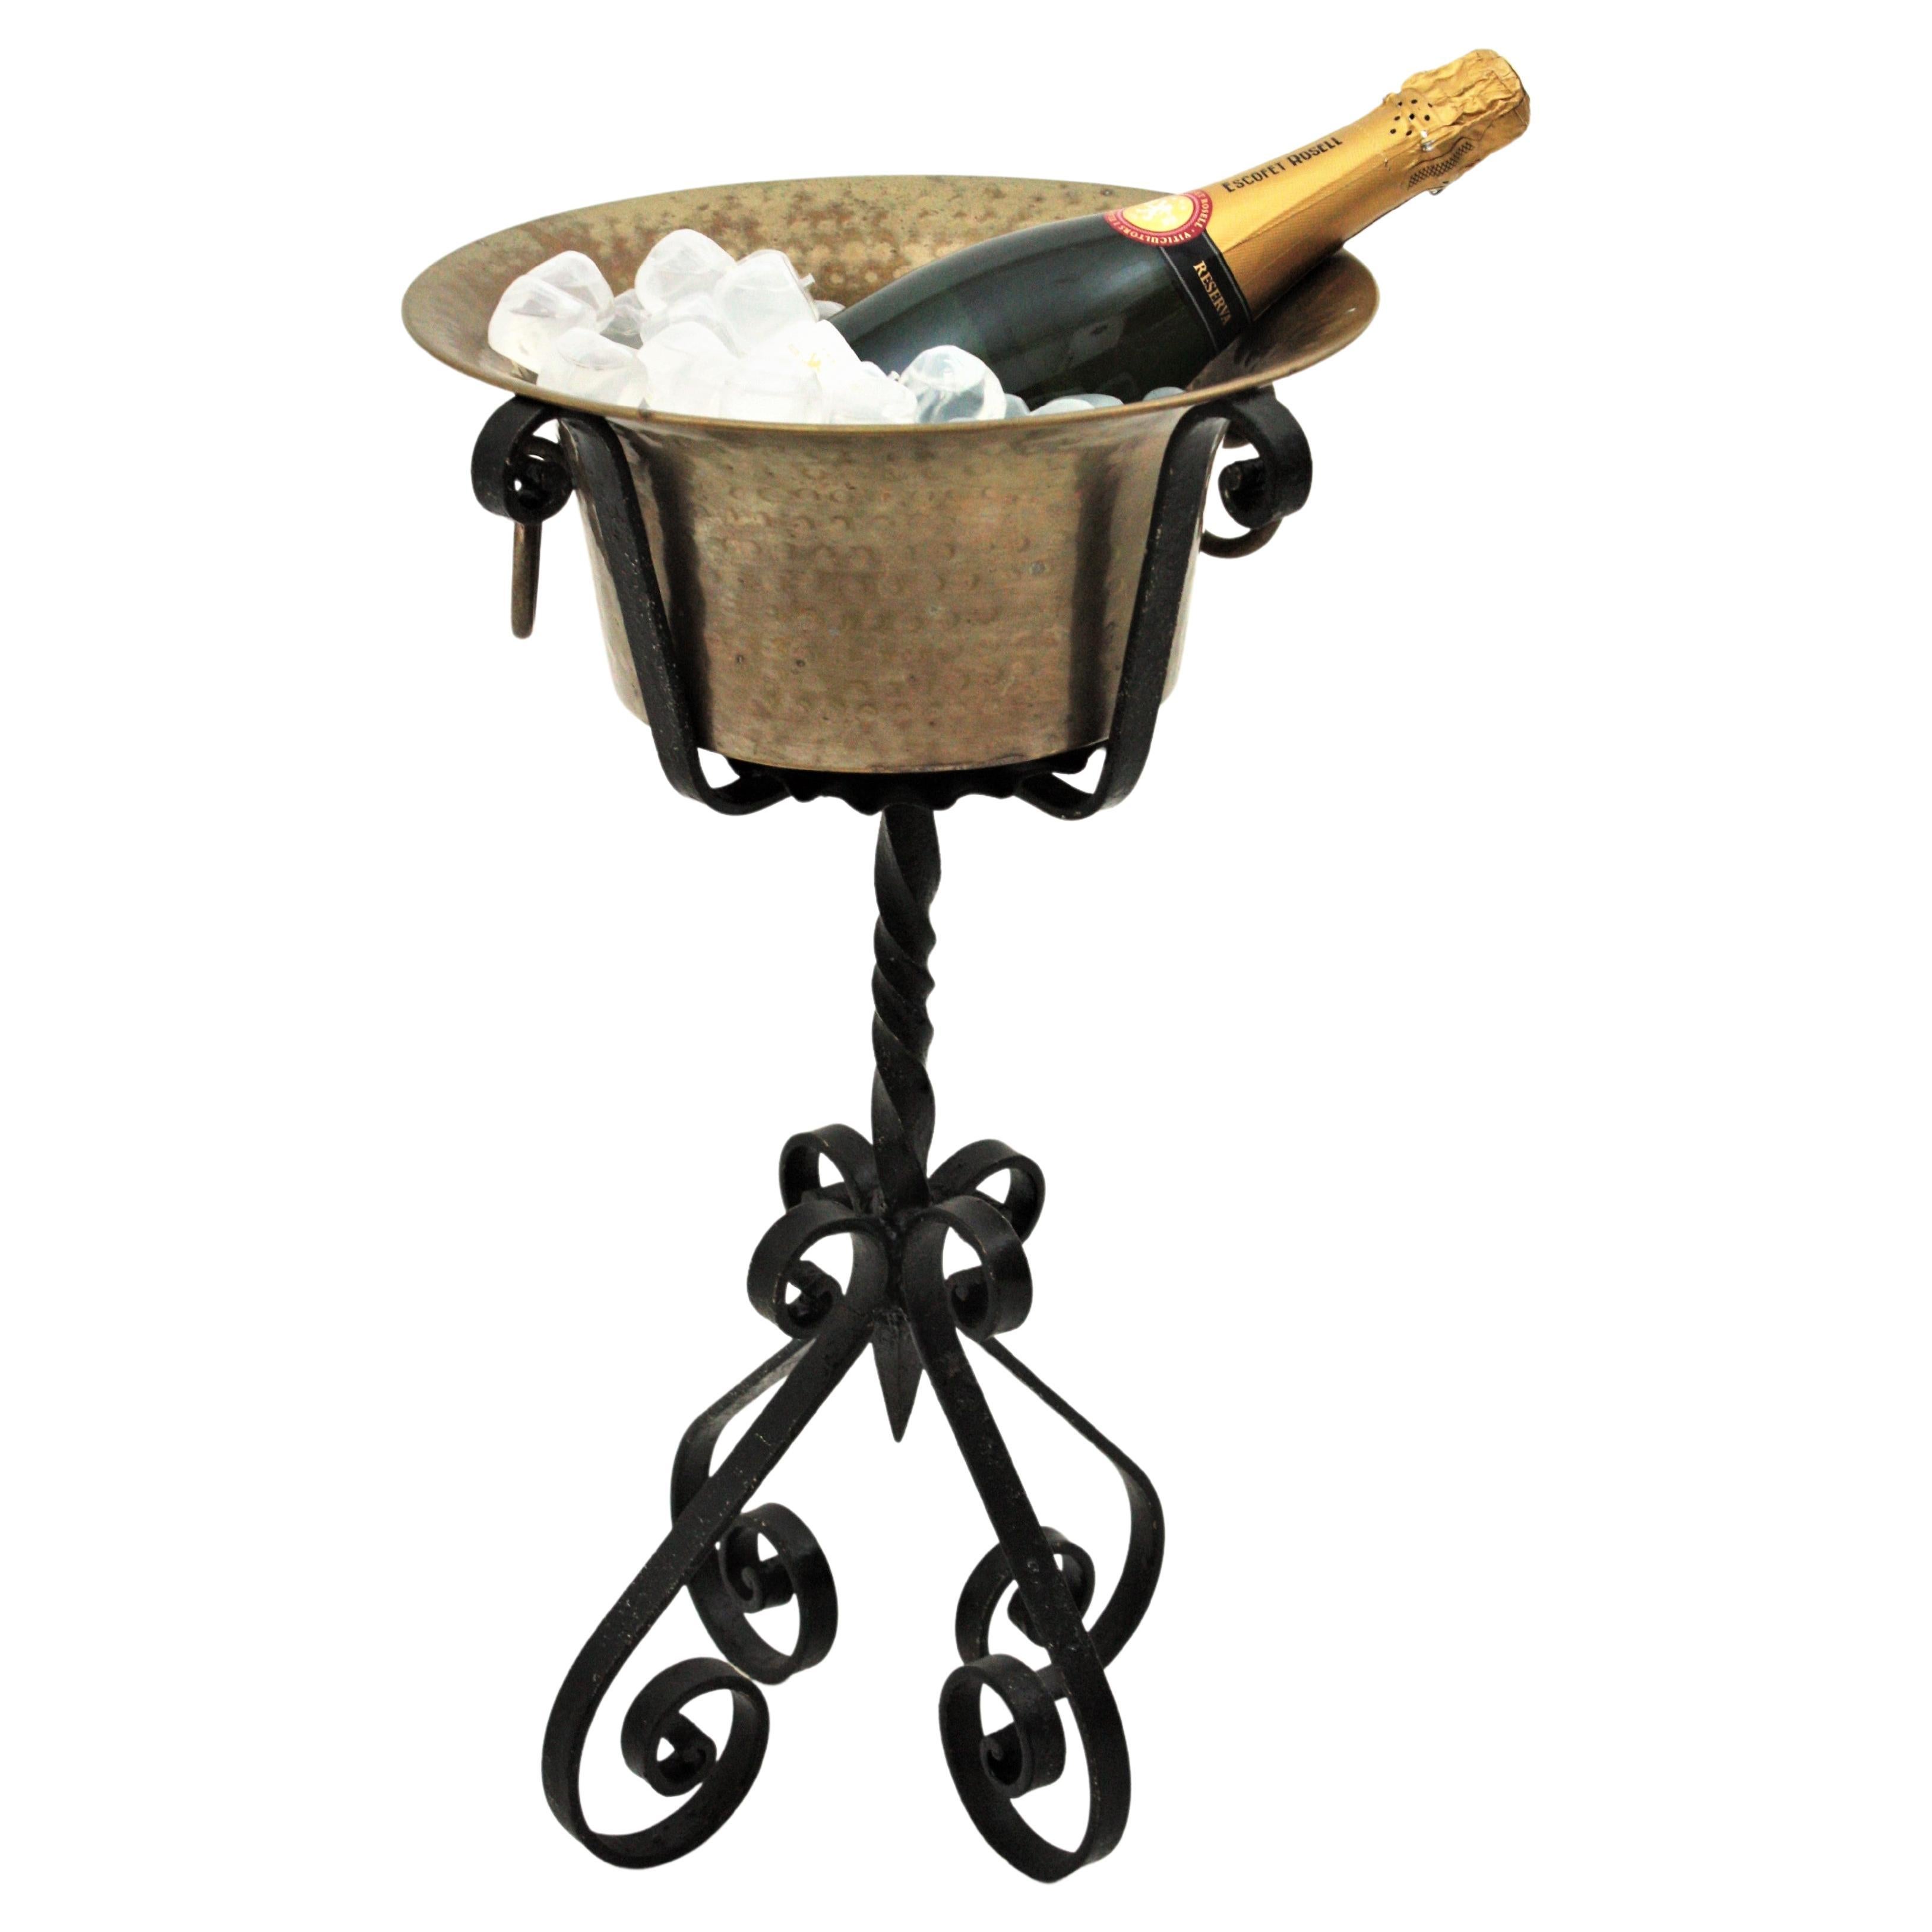 Wrought Iron and Brass Champagne Wine Cooler Standing Ice Bucket For Sale